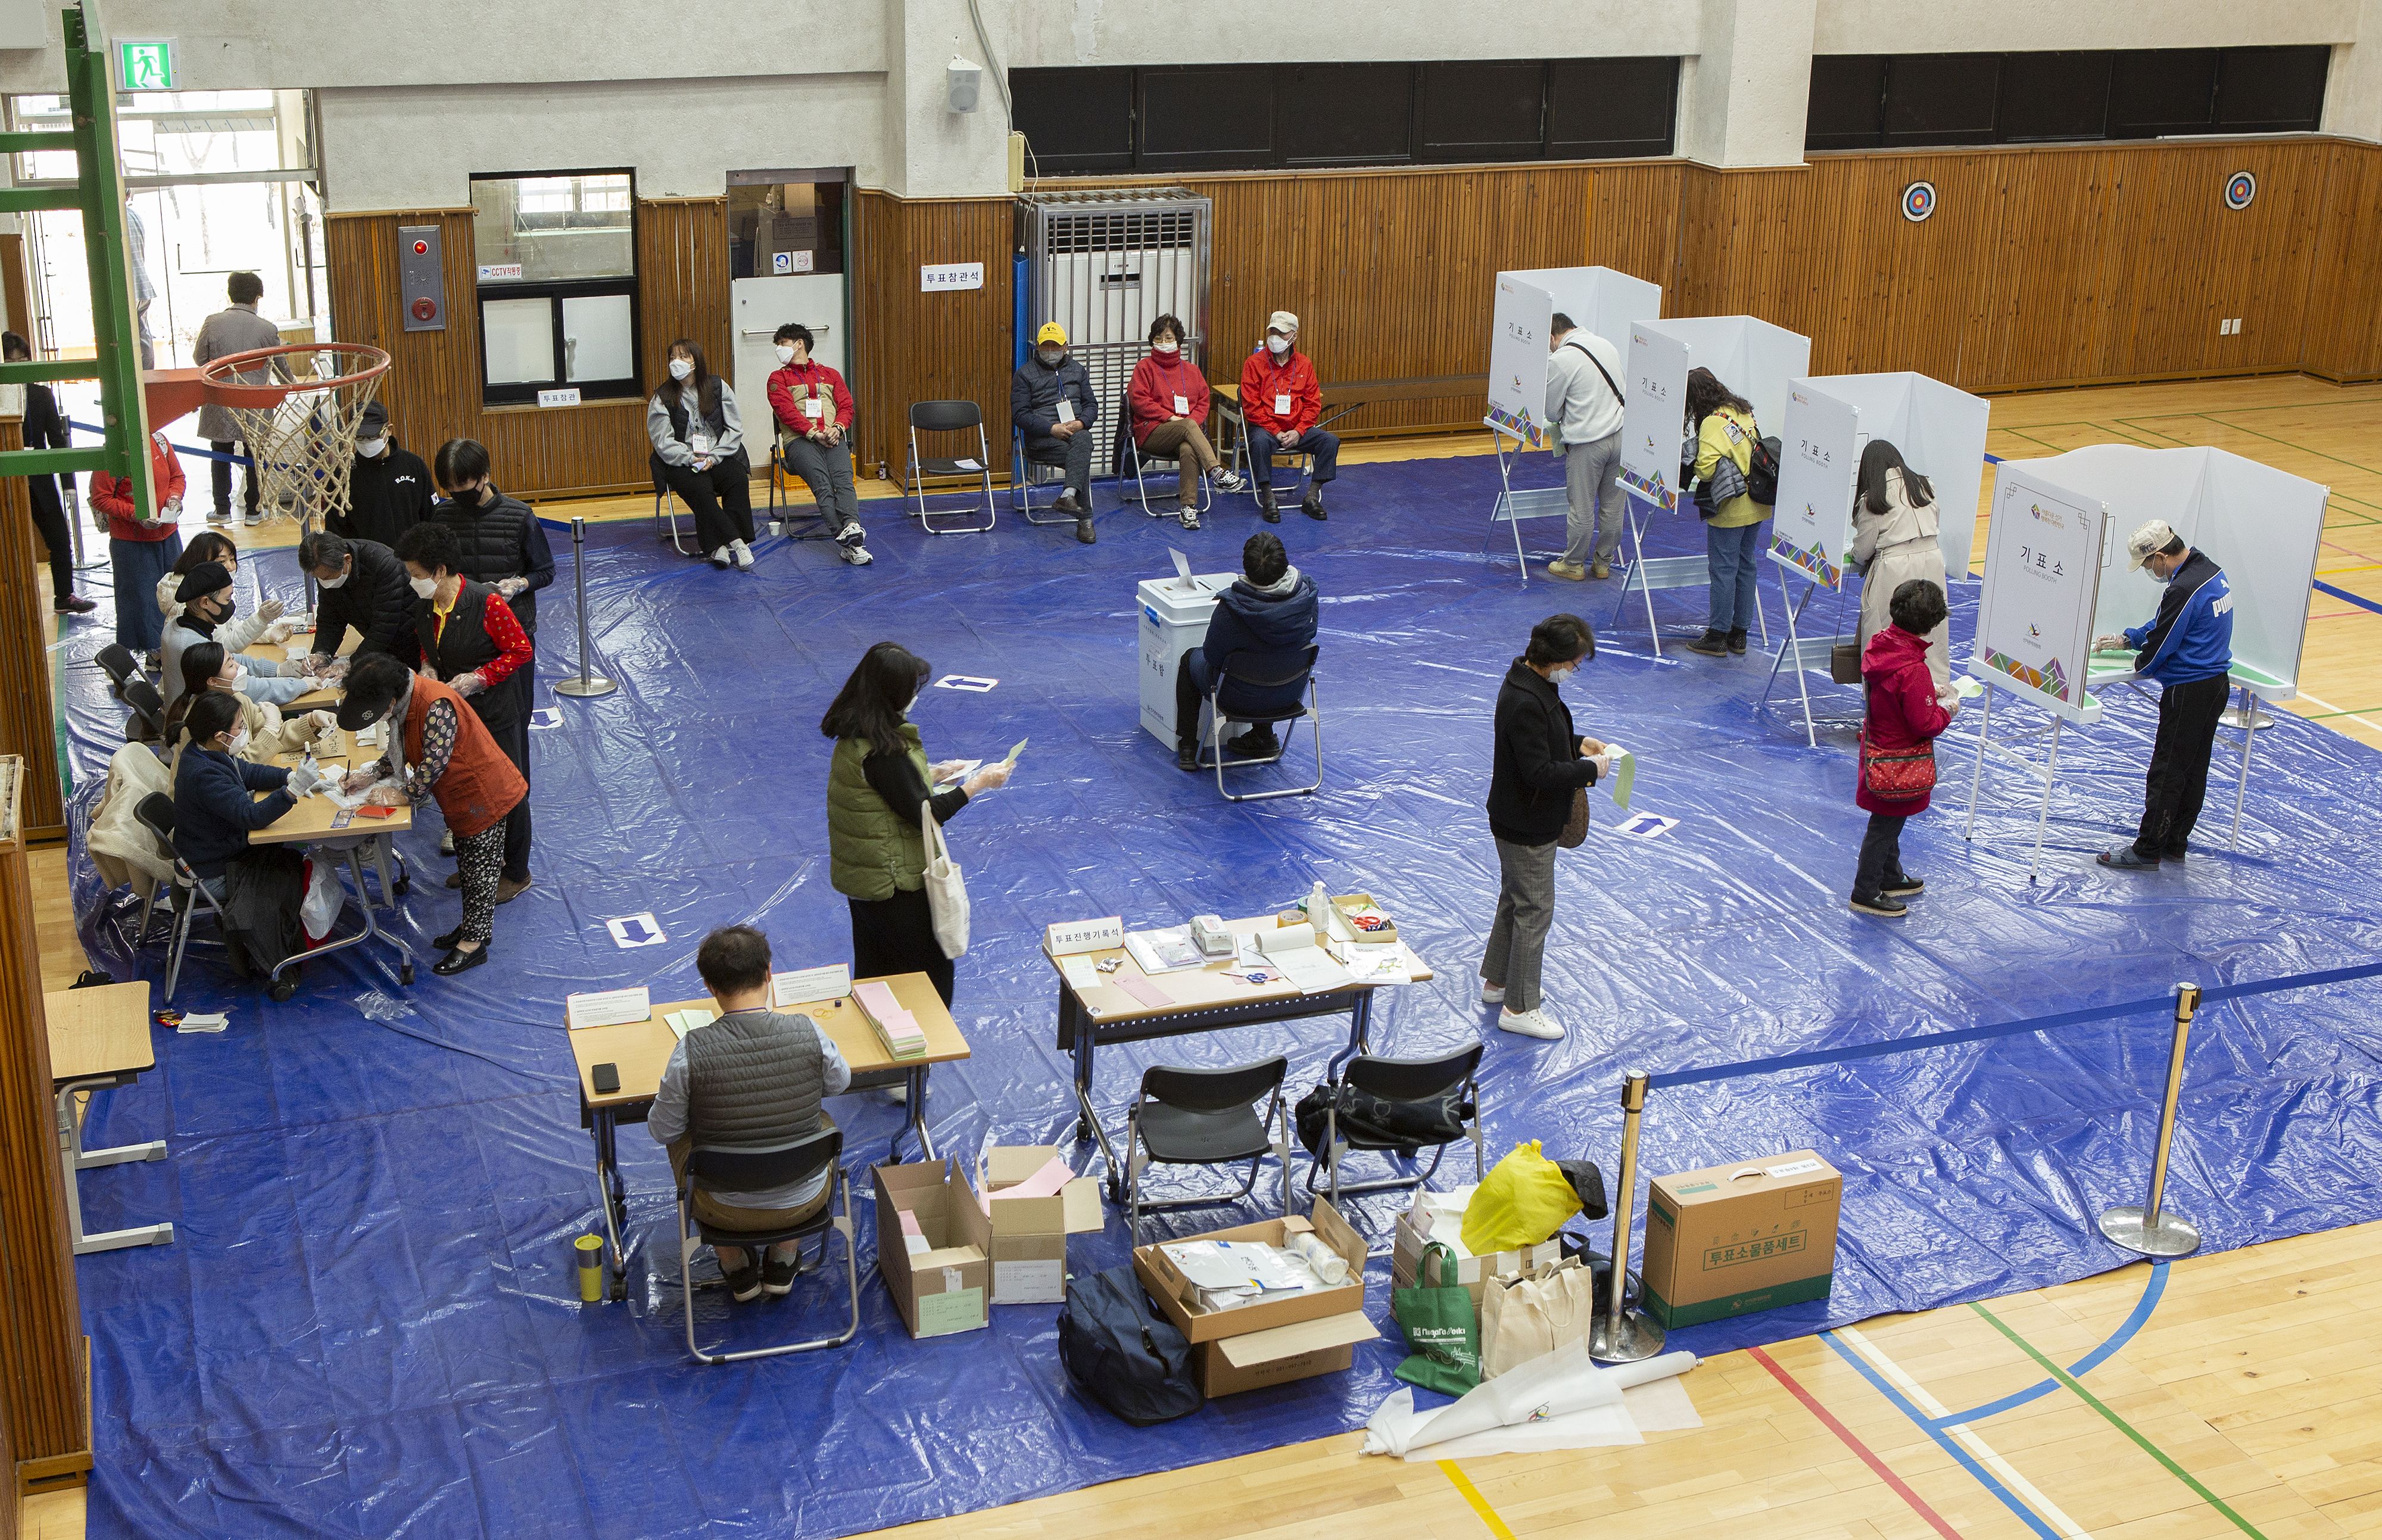 In this image, voters wait in line in a gym 